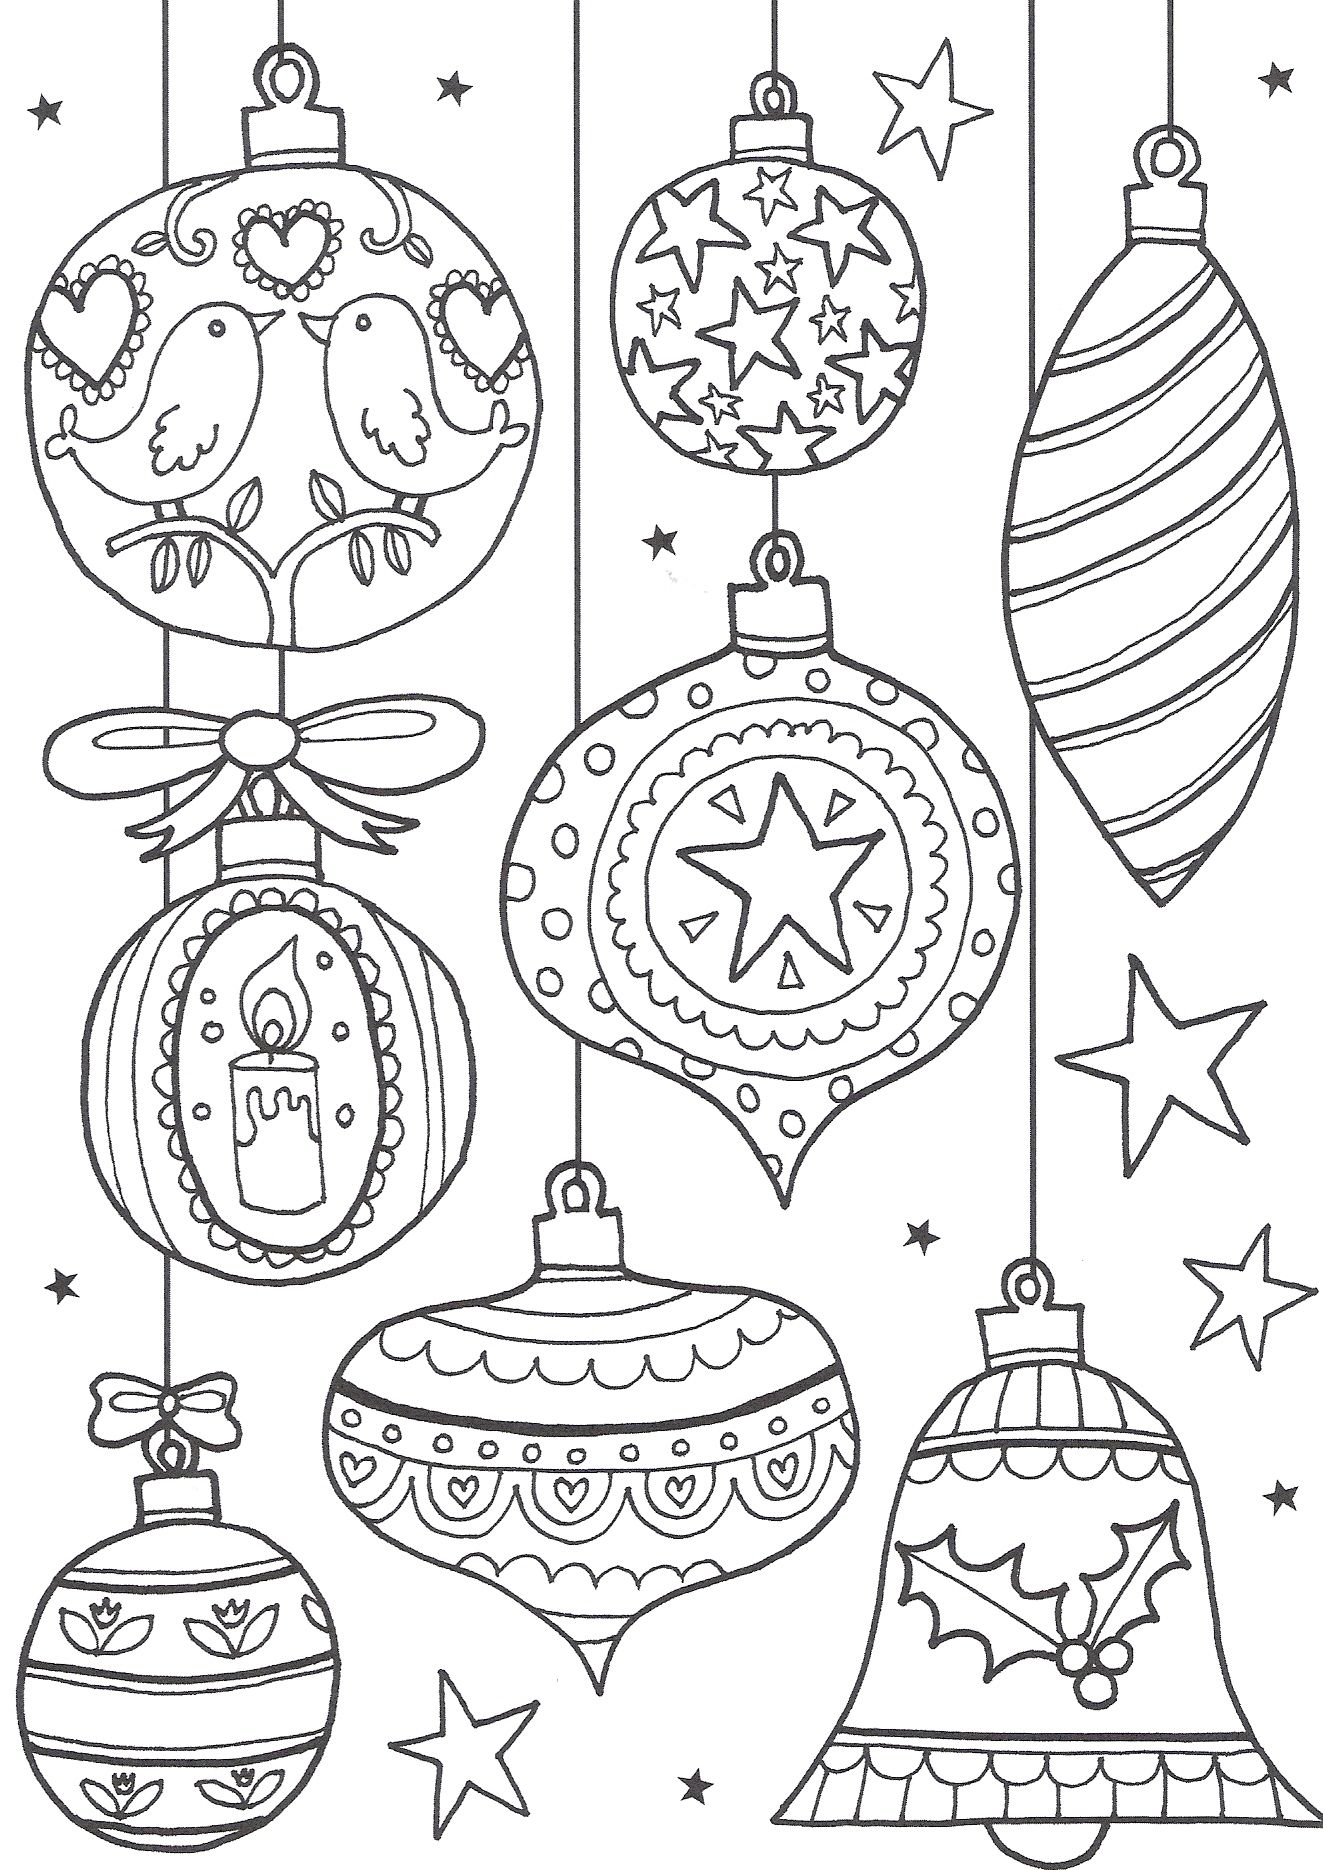 Free Christmas Colouring Pages For Adults – The Ultimate Roundup - Free Printable Christmas Coloring Pages And Activities